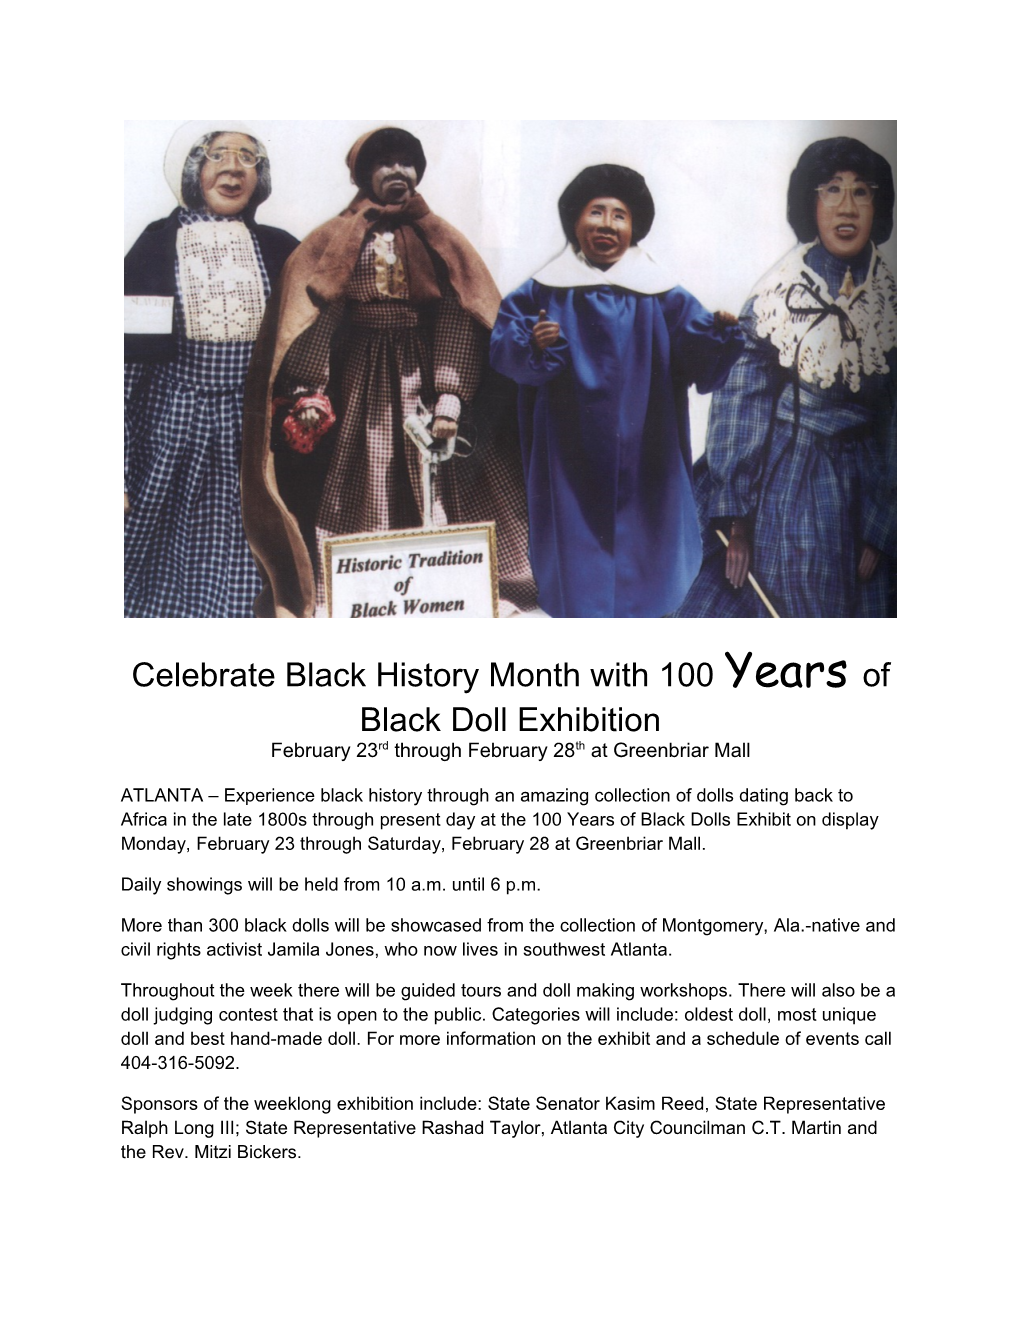 Celebrate Black History Month with 100 Years of Black Doll Exhibition